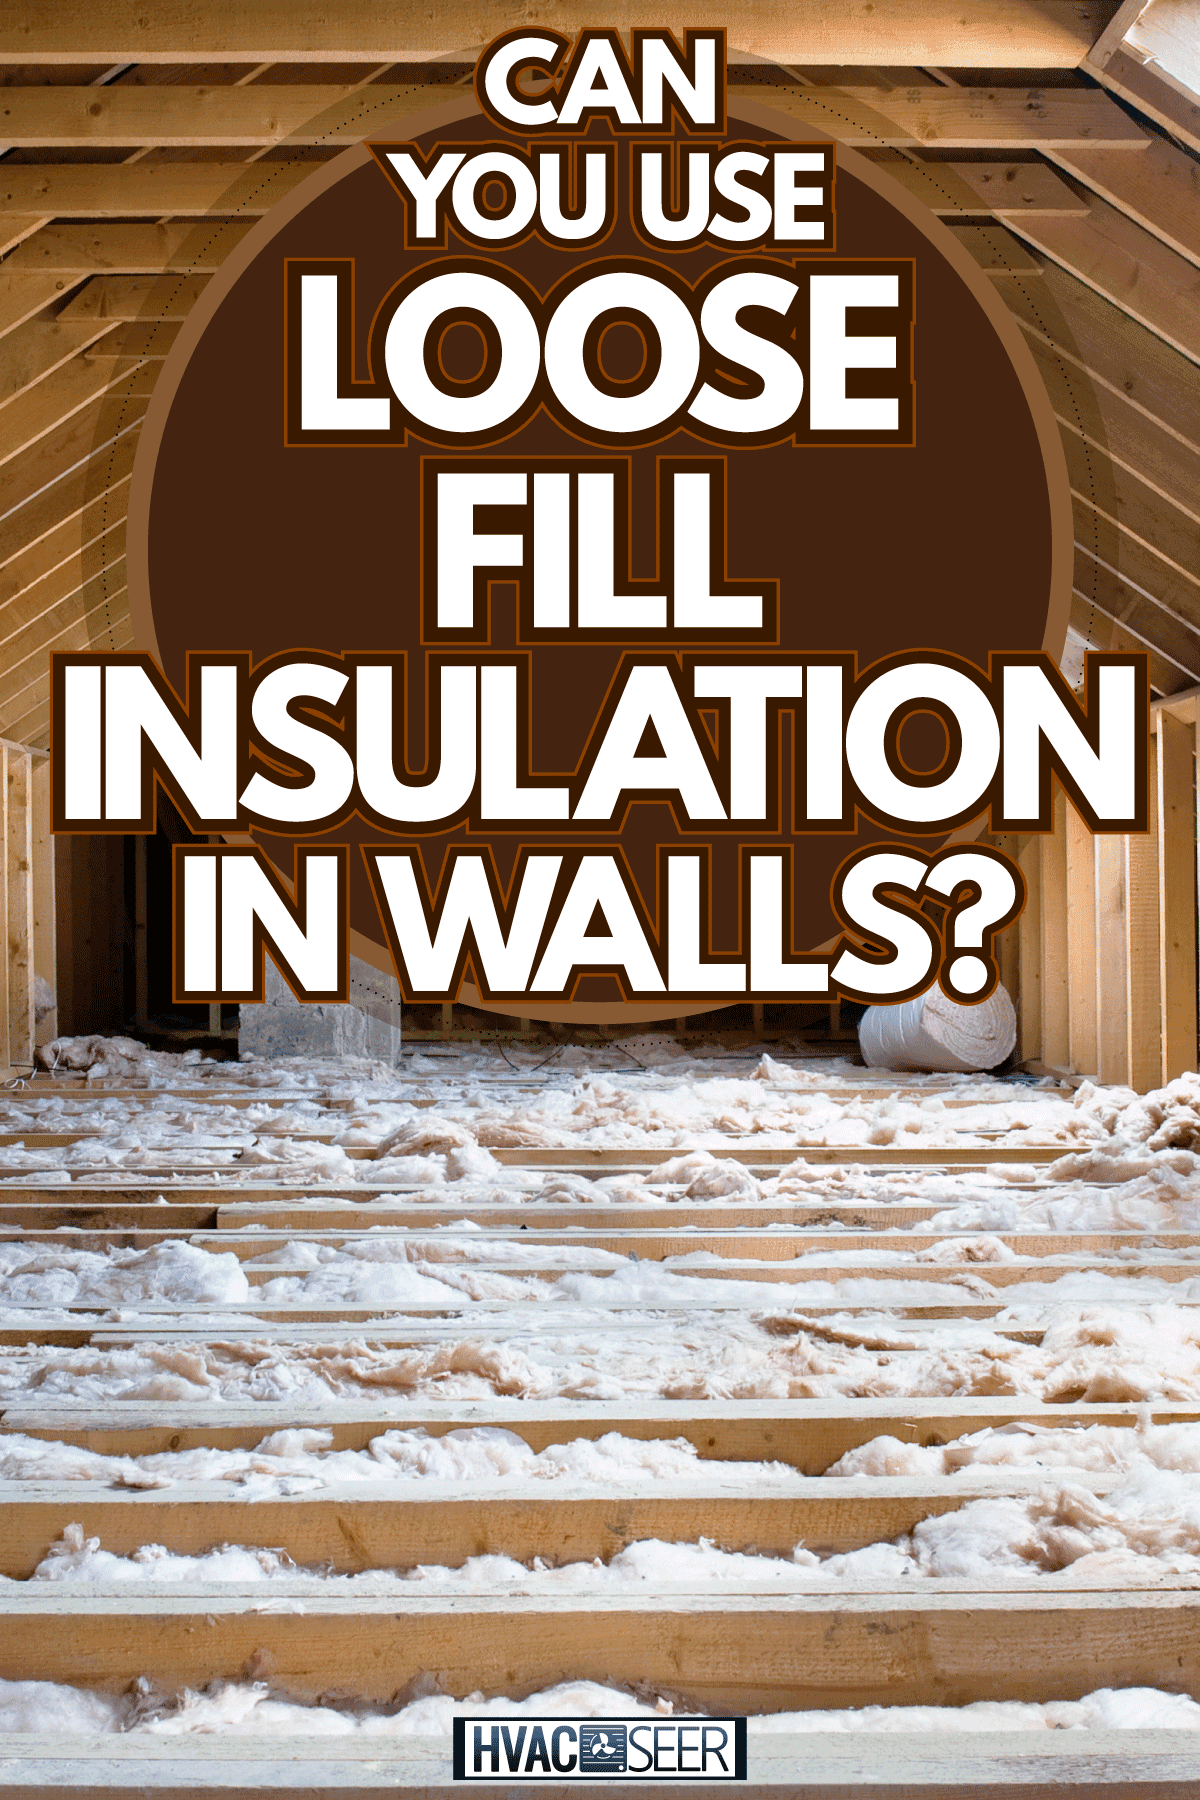 An attic of a house with loose fill insulation, Can You Use Loose Fill Insulation In Walls?